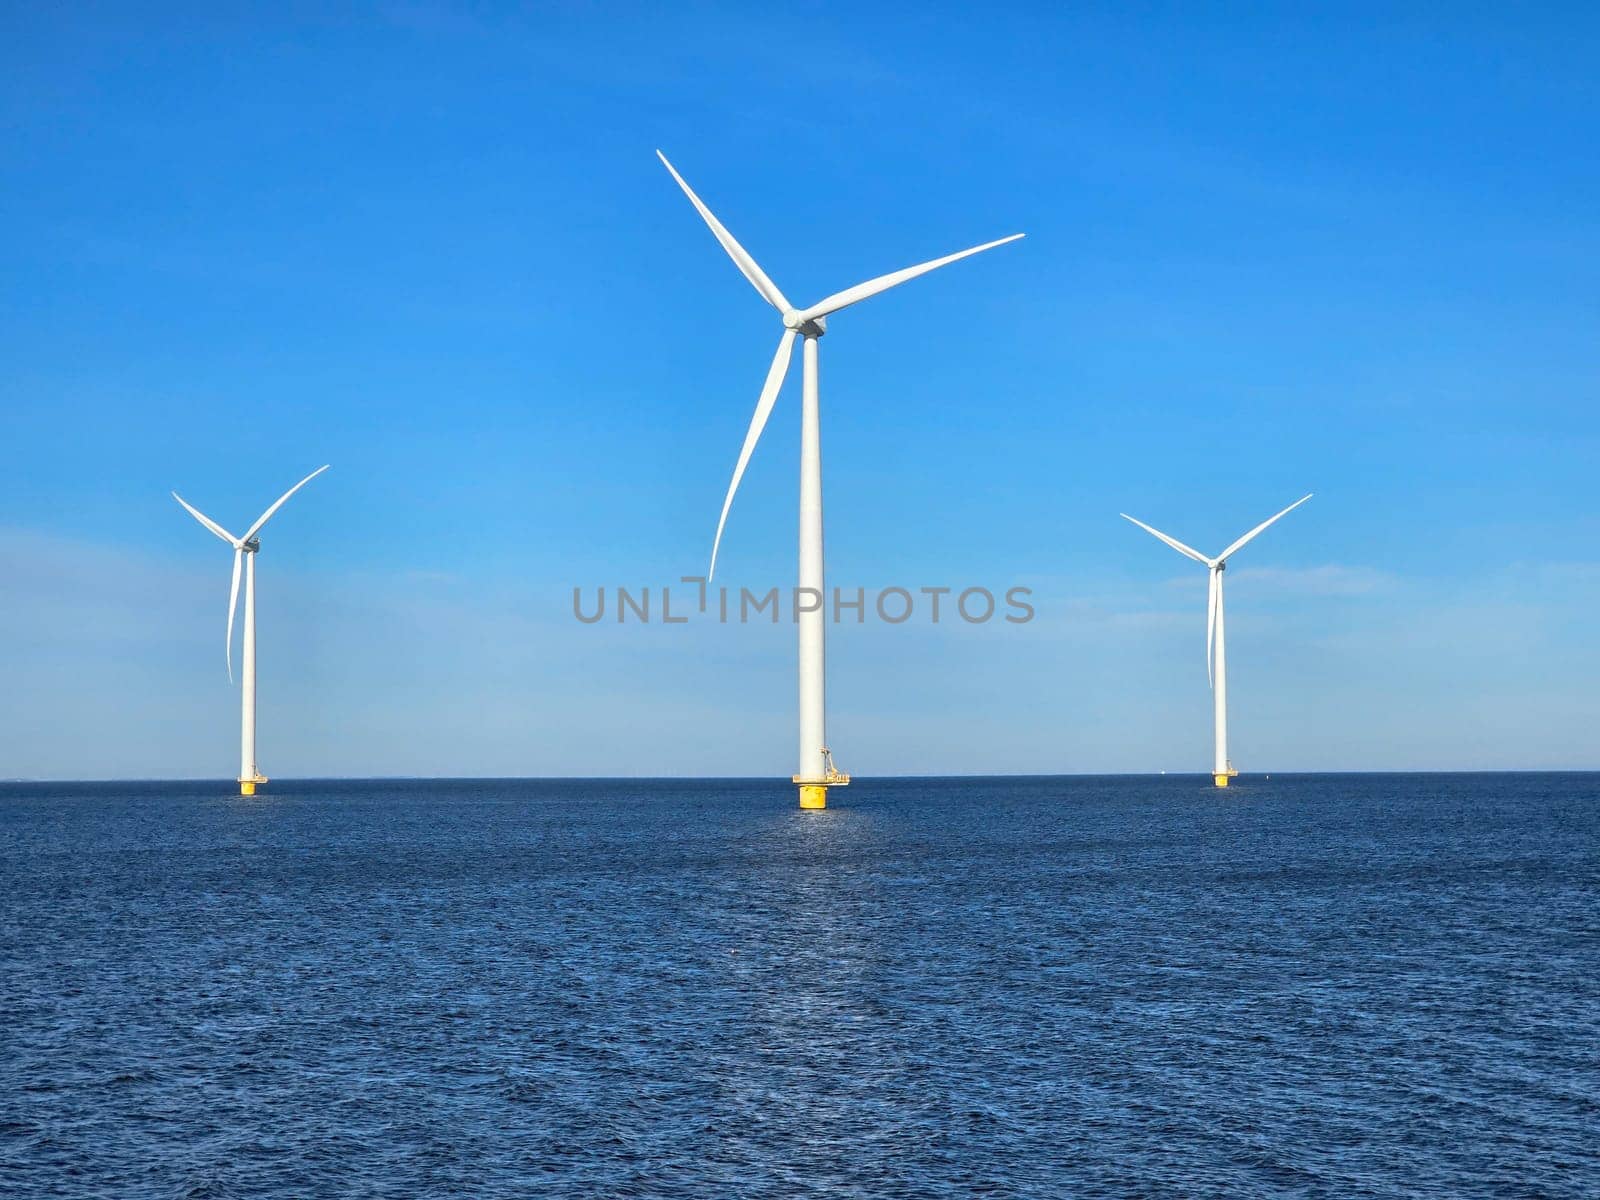 Windmill park in the ocean, drone aerial view of windmill turbines at sea in the Netherlands by fokkebok